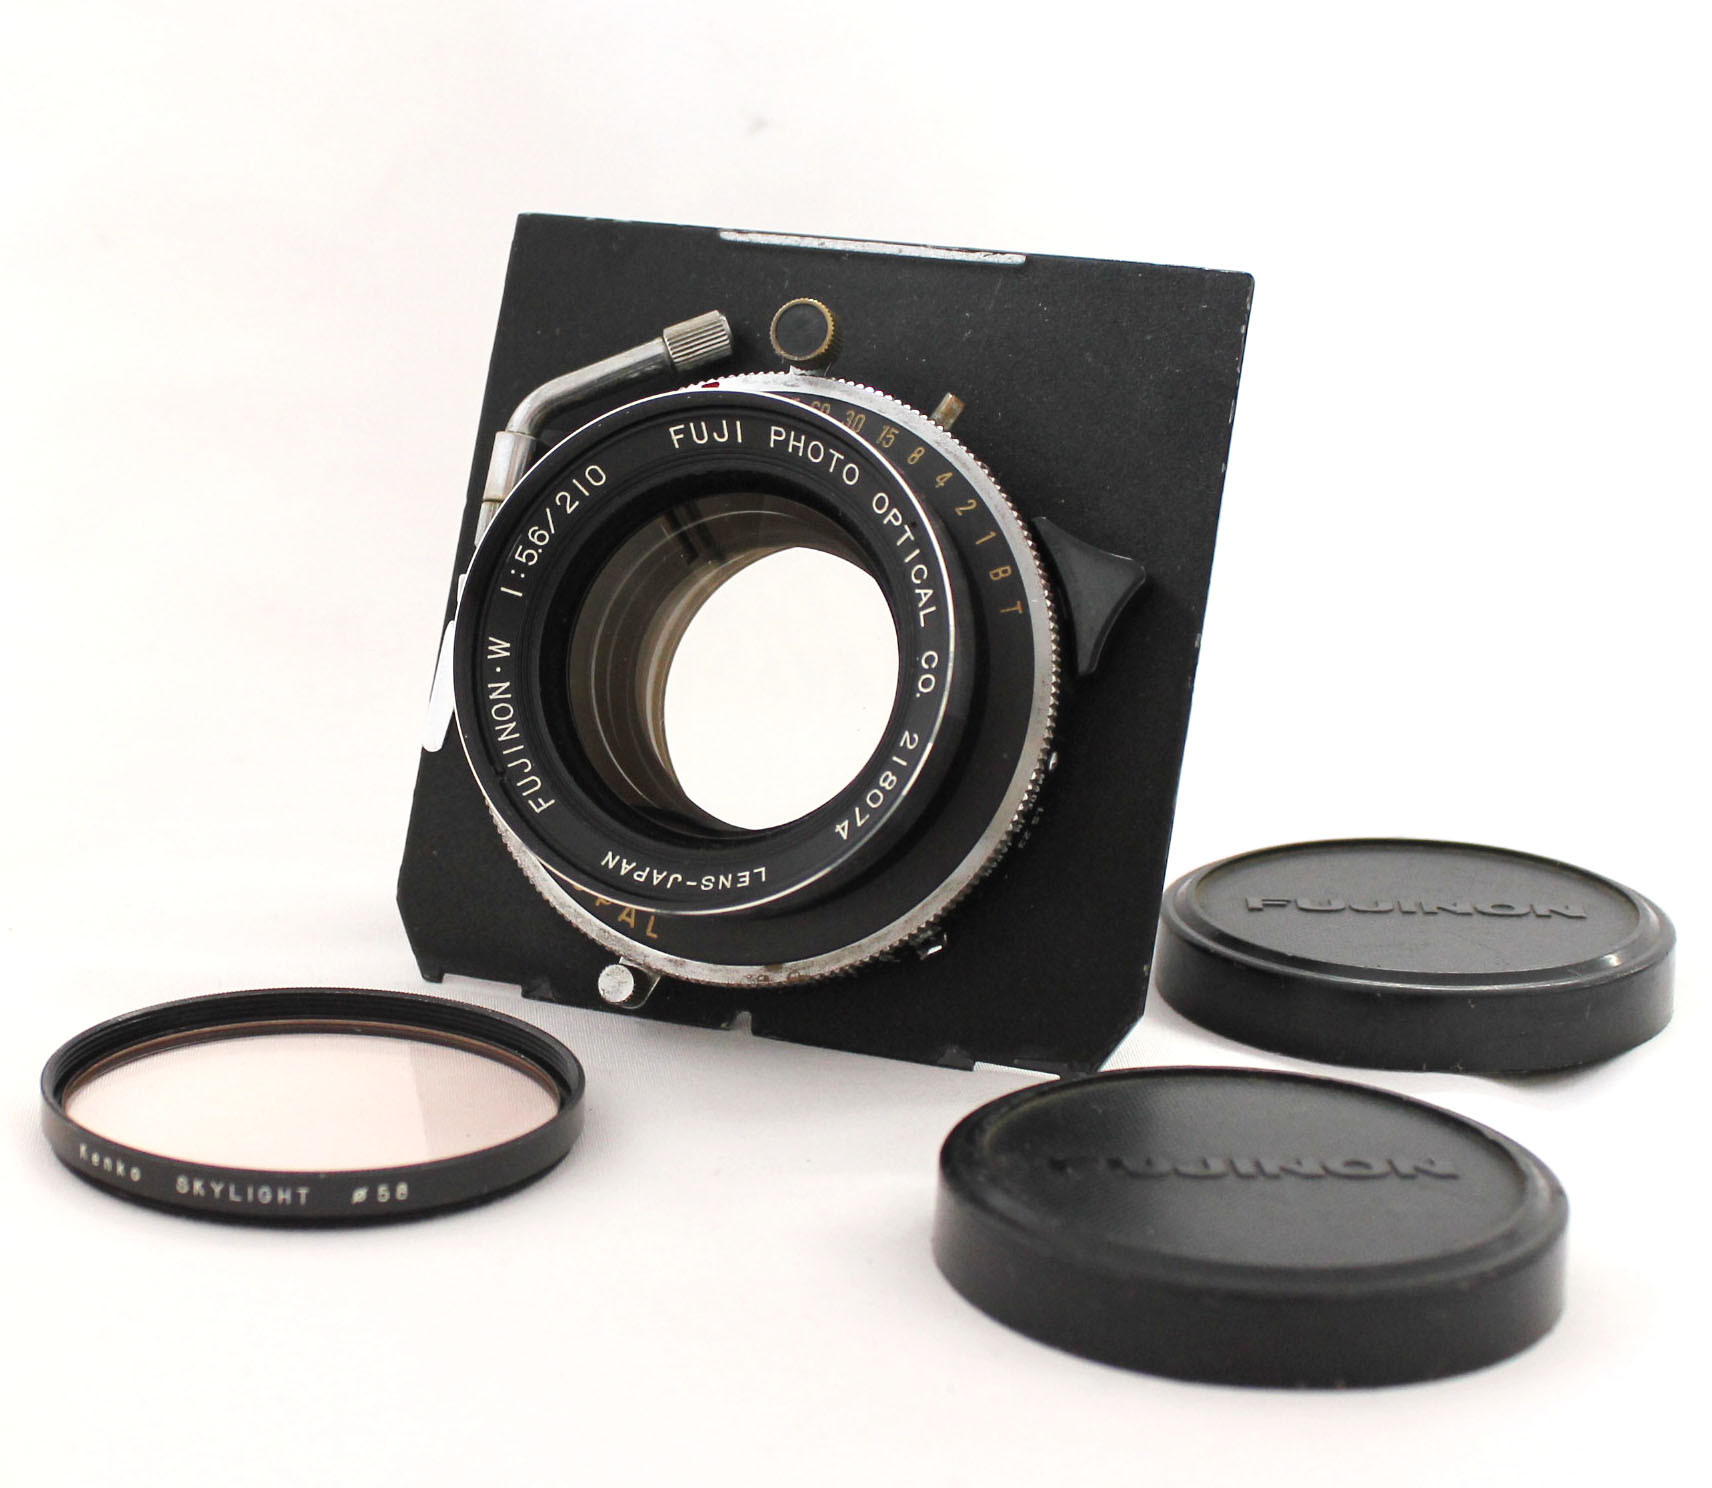 Japan Used Camera Shop | Fuji Fujinon W 210mm F/5.6 4x5 Large Format Lens with Copal Shutter from Japan